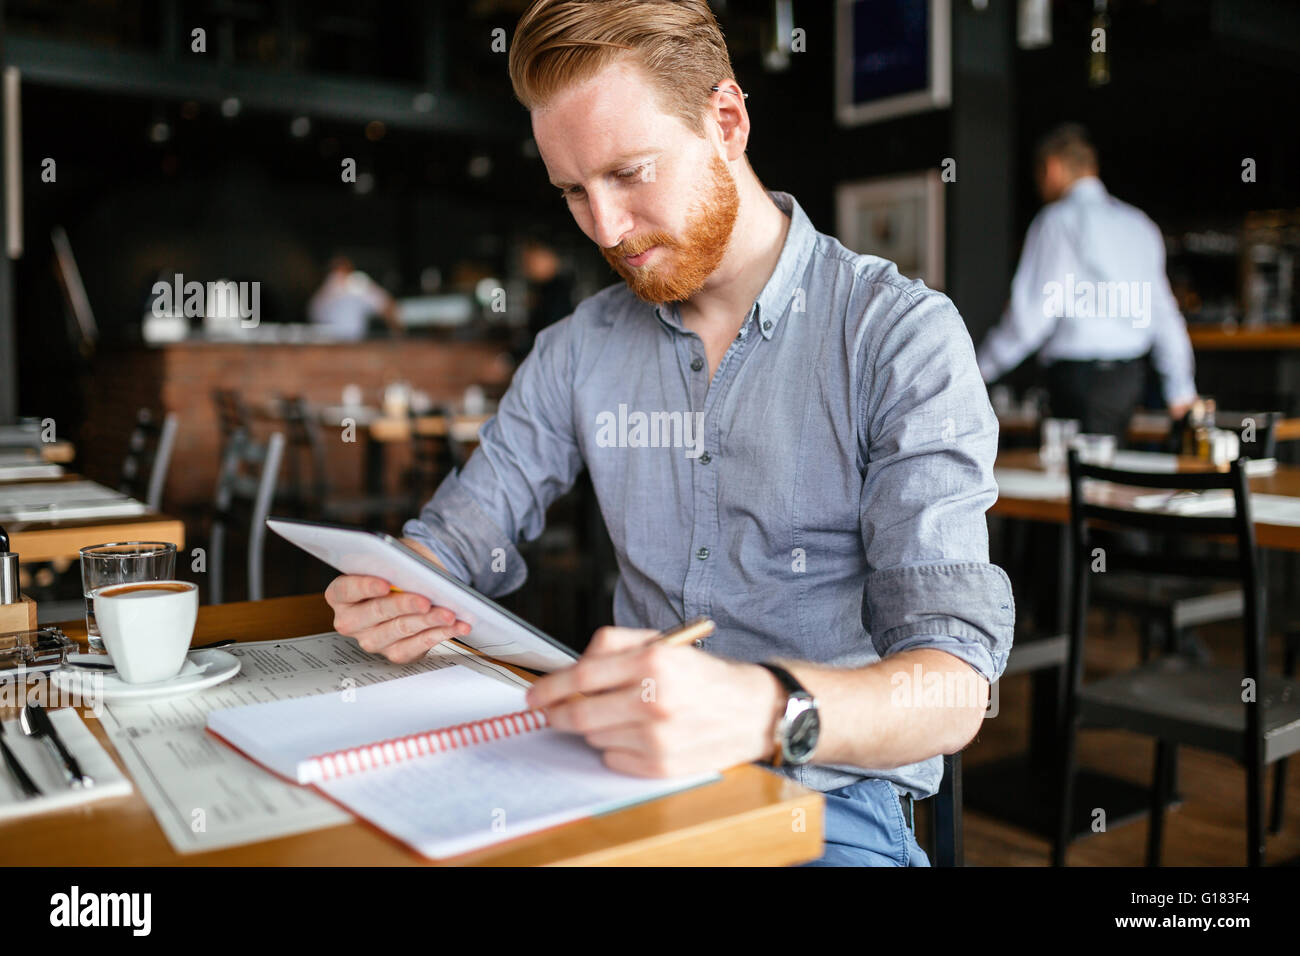 Businessman taking notes in cafe and writing down ideas Stock Photo